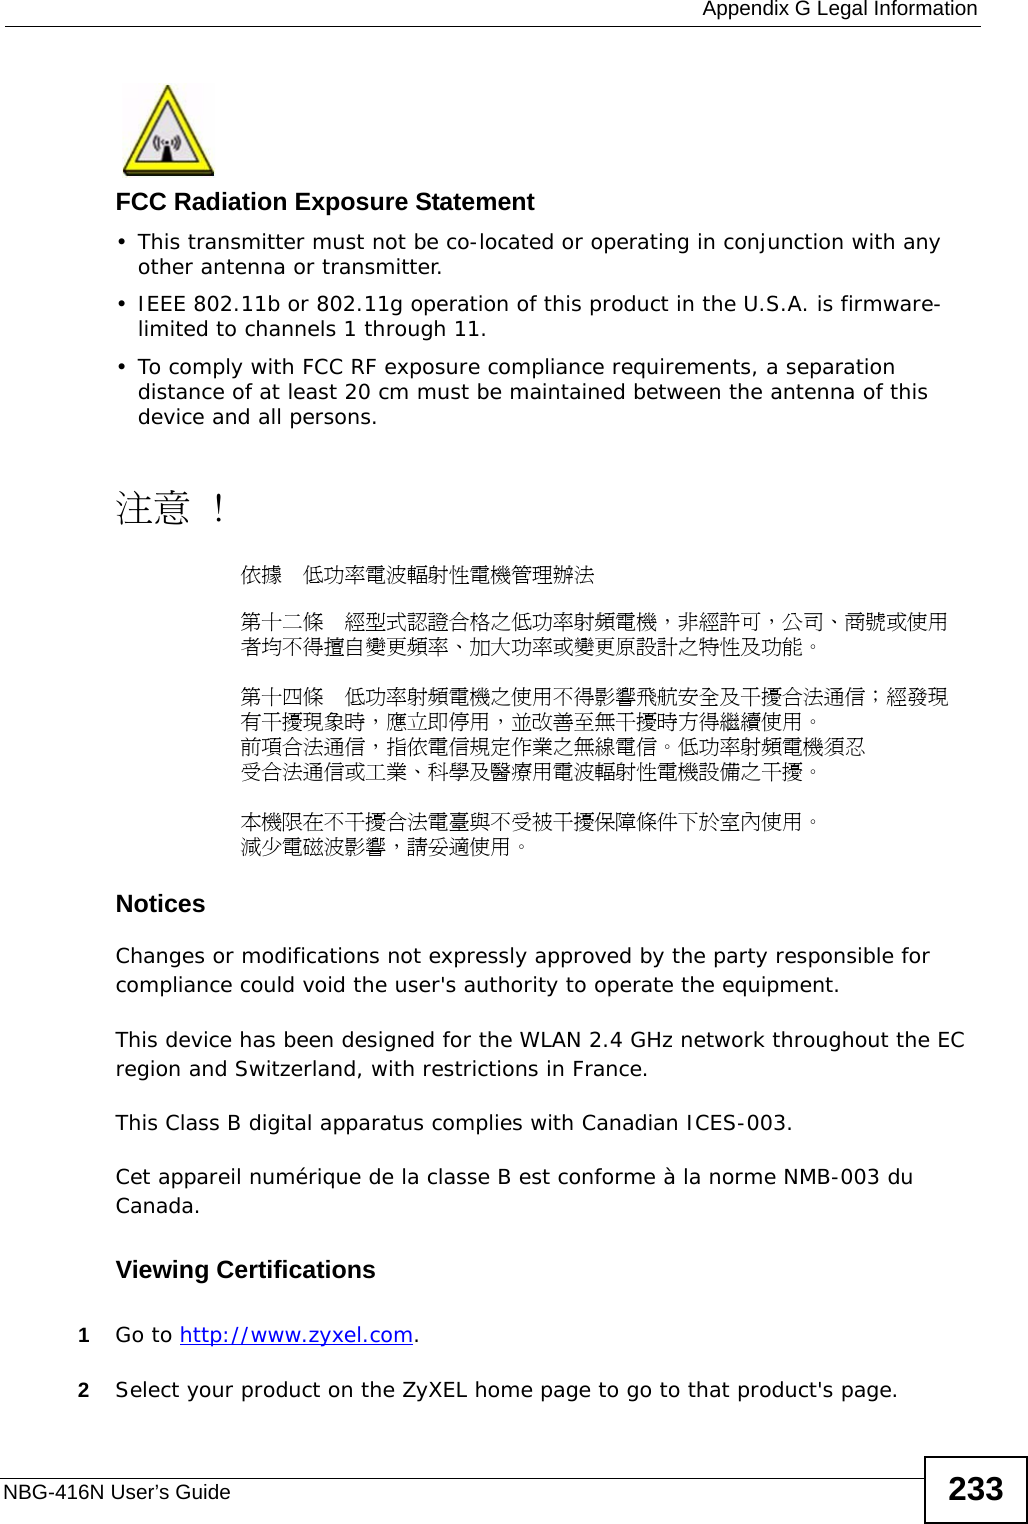  Appendix G Legal InformationNBG-416N User’s Guide 233FCC Radiation Exposure Statement• This transmitter must not be co-located or operating in conjunction with any other antenna or transmitter. • IEEE 802.11b or 802.11g operation of this product in the U.S.A. is firmware-limited to channels 1 through 11. • To comply with FCC RF exposure compliance requirements, a separation distance of at least 20 cm must be maintained between the antenna of this device and all persons. 注意 !依據  低功率電波輻射性電機管理辦法第十二條  經型式認證合格之低功率射頻電機，非經許可，公司、商號或使用者均不得擅自變更頻率、加大功率或變更原設計之特性及功能。第十四條  低功率射頻電機之使用不得影響飛航安全及干擾合法通信；經發現有干擾現象時，應立即停用，並改善至無干擾時方得繼續使用。前項合法通信，指依電信規定作業之無線電信。低功率射頻電機須忍受合法通信或工業、科學及醫療用電波輻射性電機設備之干擾。 本機限在不干擾合法電臺與不受被干擾保障條件下於室內使用。 減少電磁波影響，請妥適使用。Notices Changes or modifications not expressly approved by the party responsible for compliance could void the user&apos;s authority to operate the equipment.This device has been designed for the WLAN 2.4 GHz network throughout the EC region and Switzerland, with restrictions in France. This Class B digital apparatus complies with Canadian ICES-003.Cet appareil numérique de la classe B est conforme à la norme NMB-003 du Canada.Viewing Certifications1Go to http://www.zyxel.com.2Select your product on the ZyXEL home page to go to that product&apos;s page.